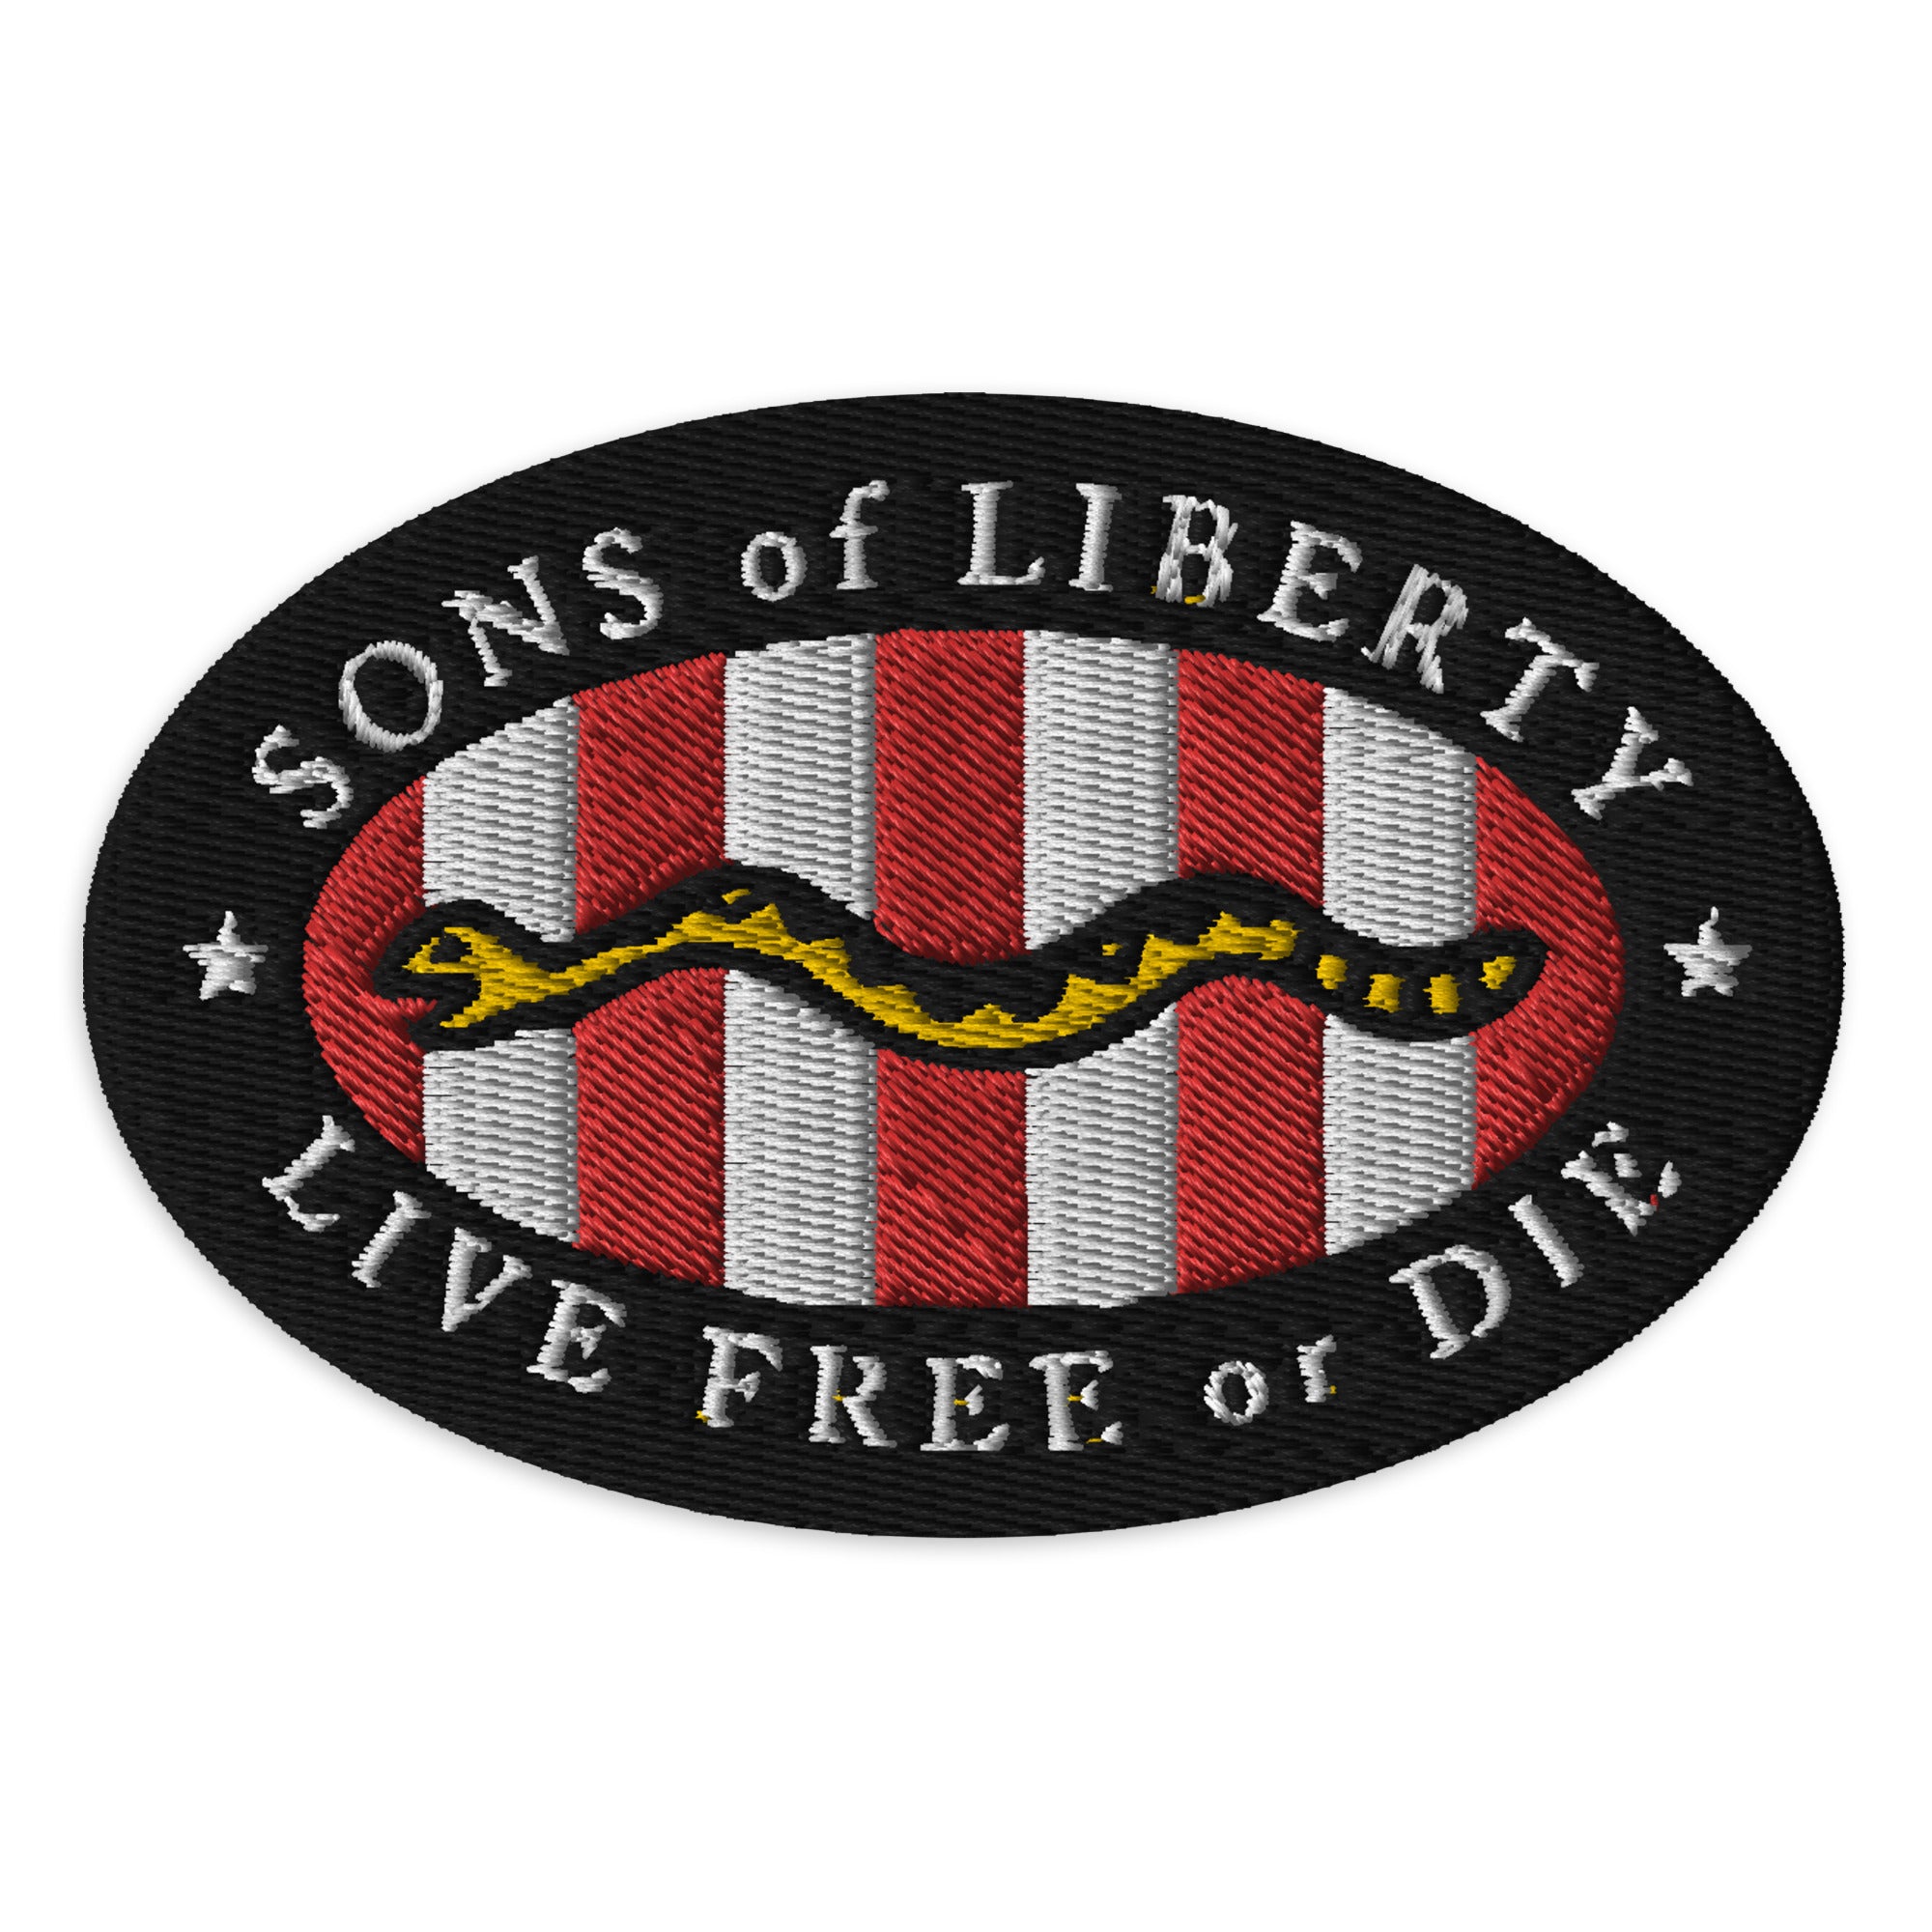 Give Me Liberty or Give Me Death Funny Morale Patches Emblem Green